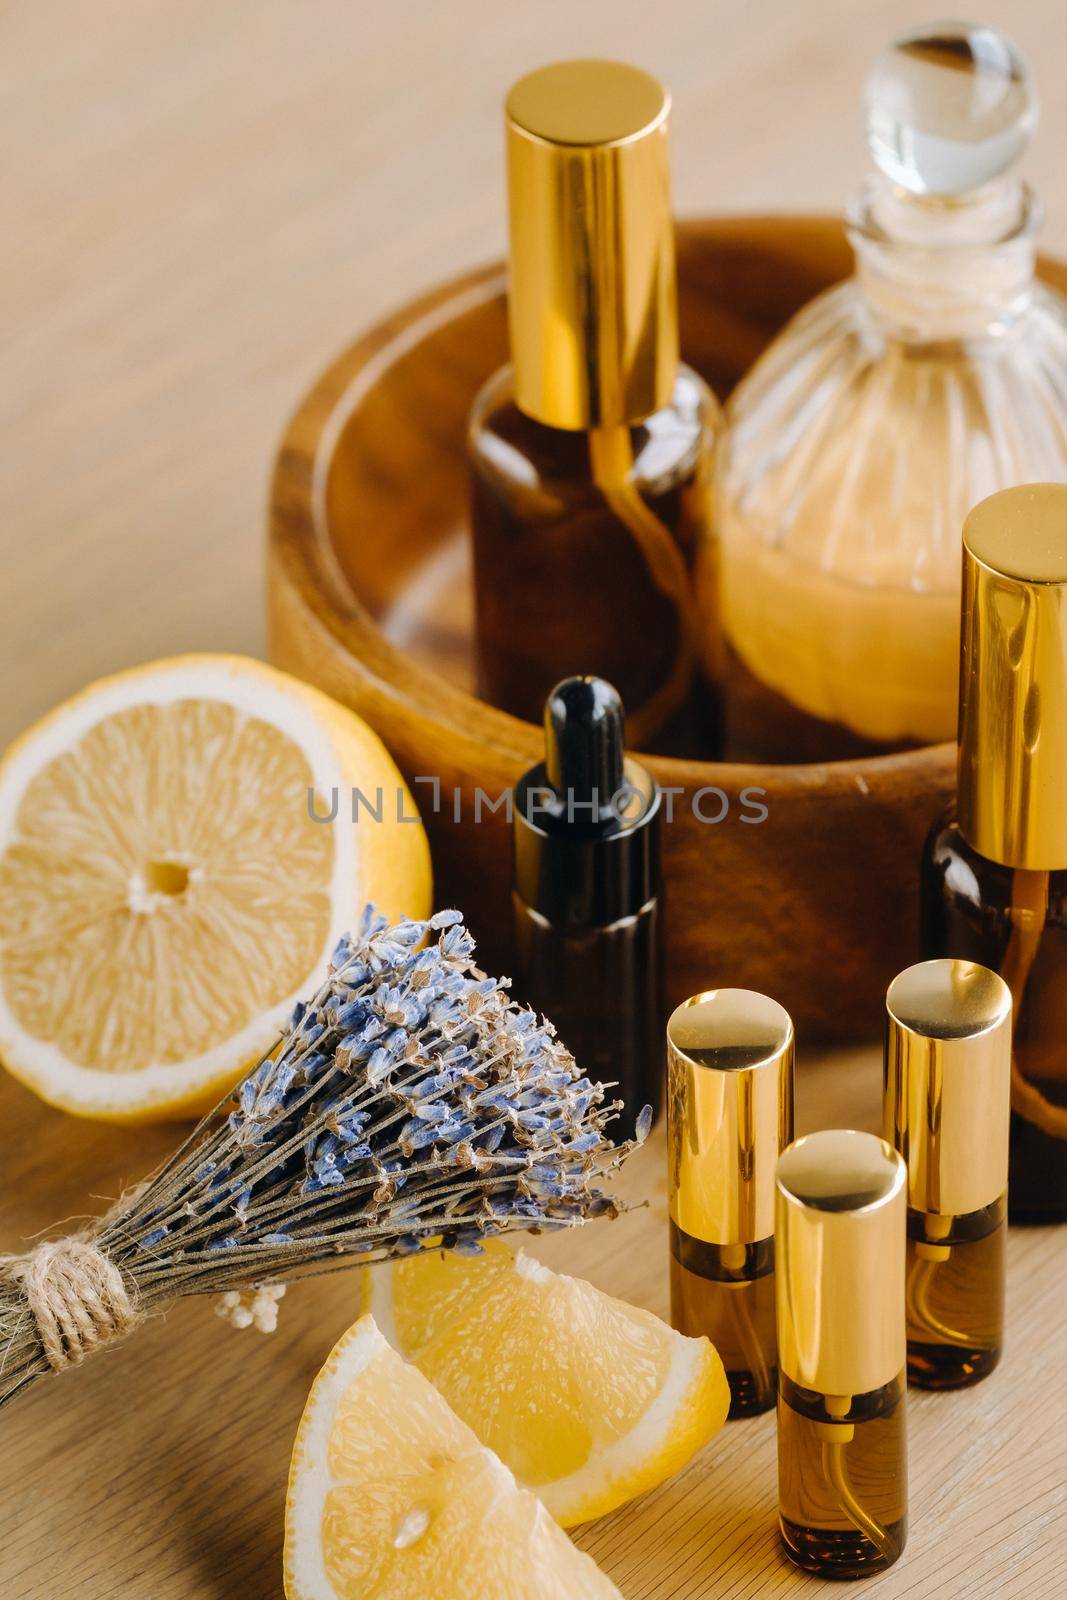 Essential oil in bottles with lemon and lavender fragrance, lying on a wooden surface.